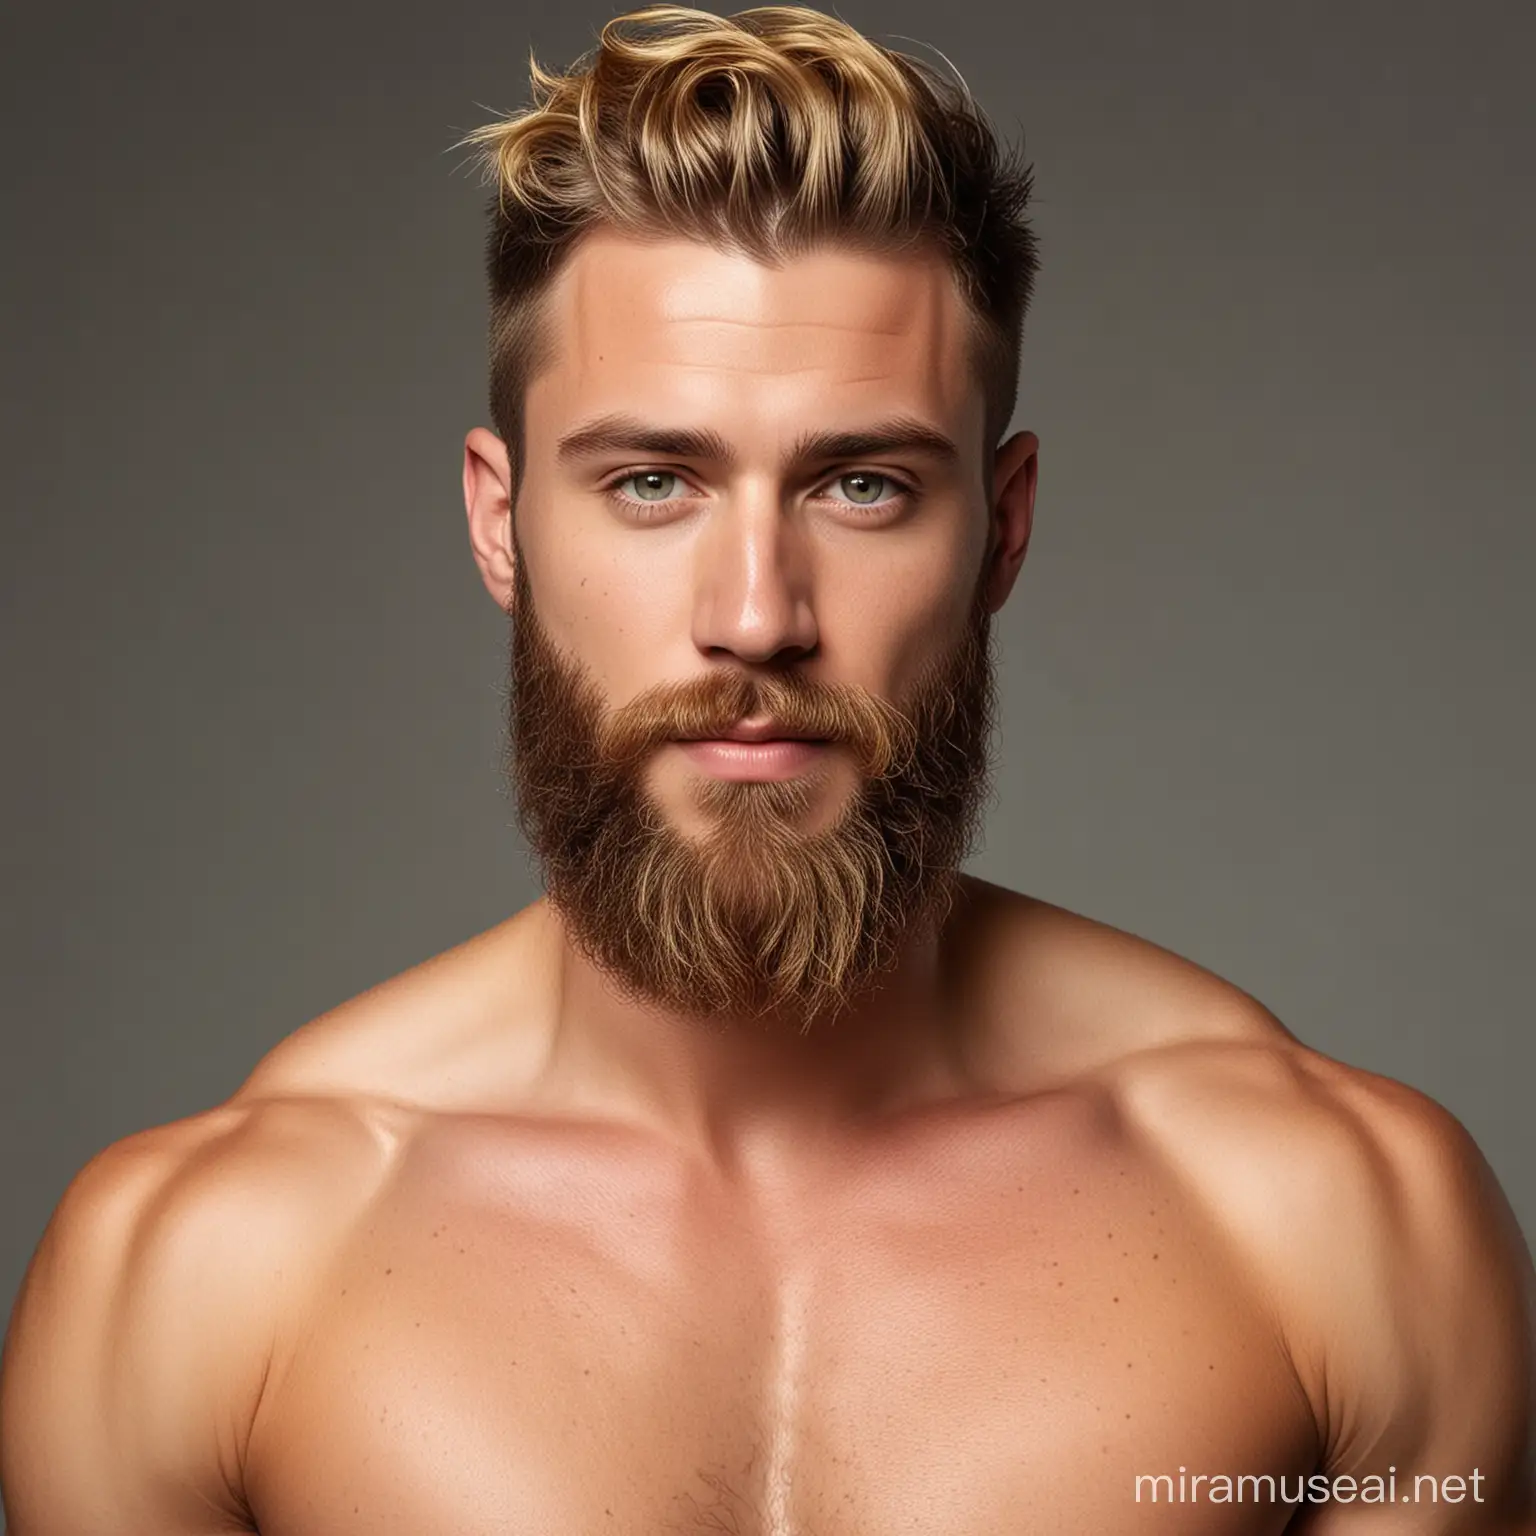 Handsome Muscular Man with Golden Hair and Beard